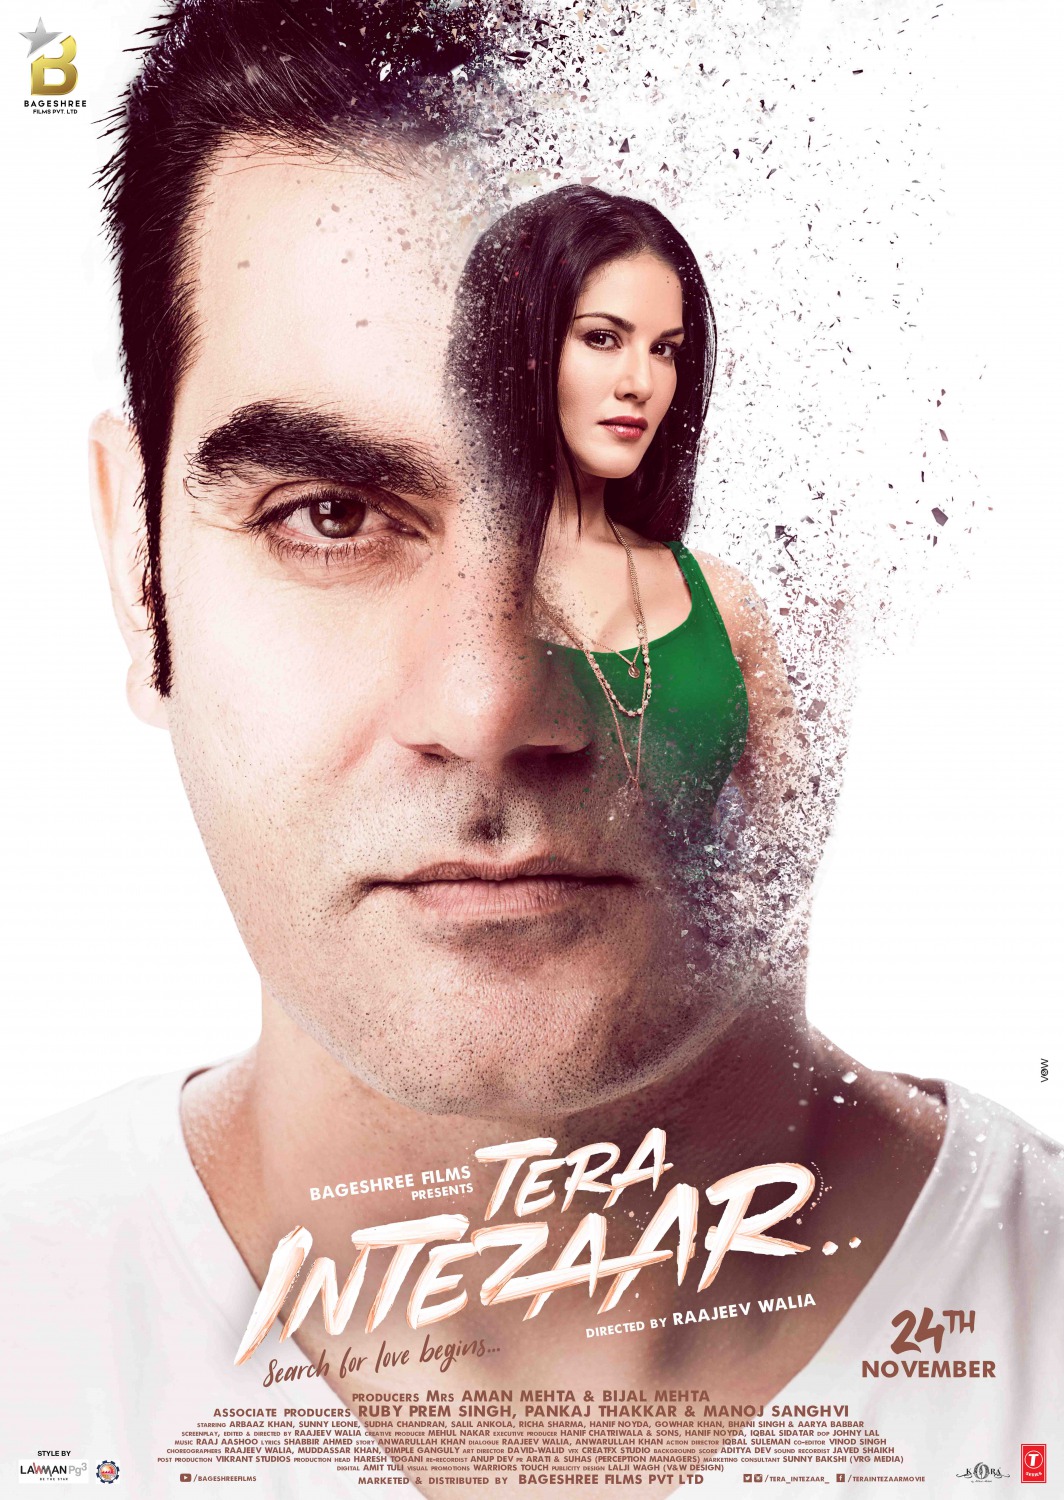 Extra Large Movie Poster Image for Tera Intezaar (#2 of 4)